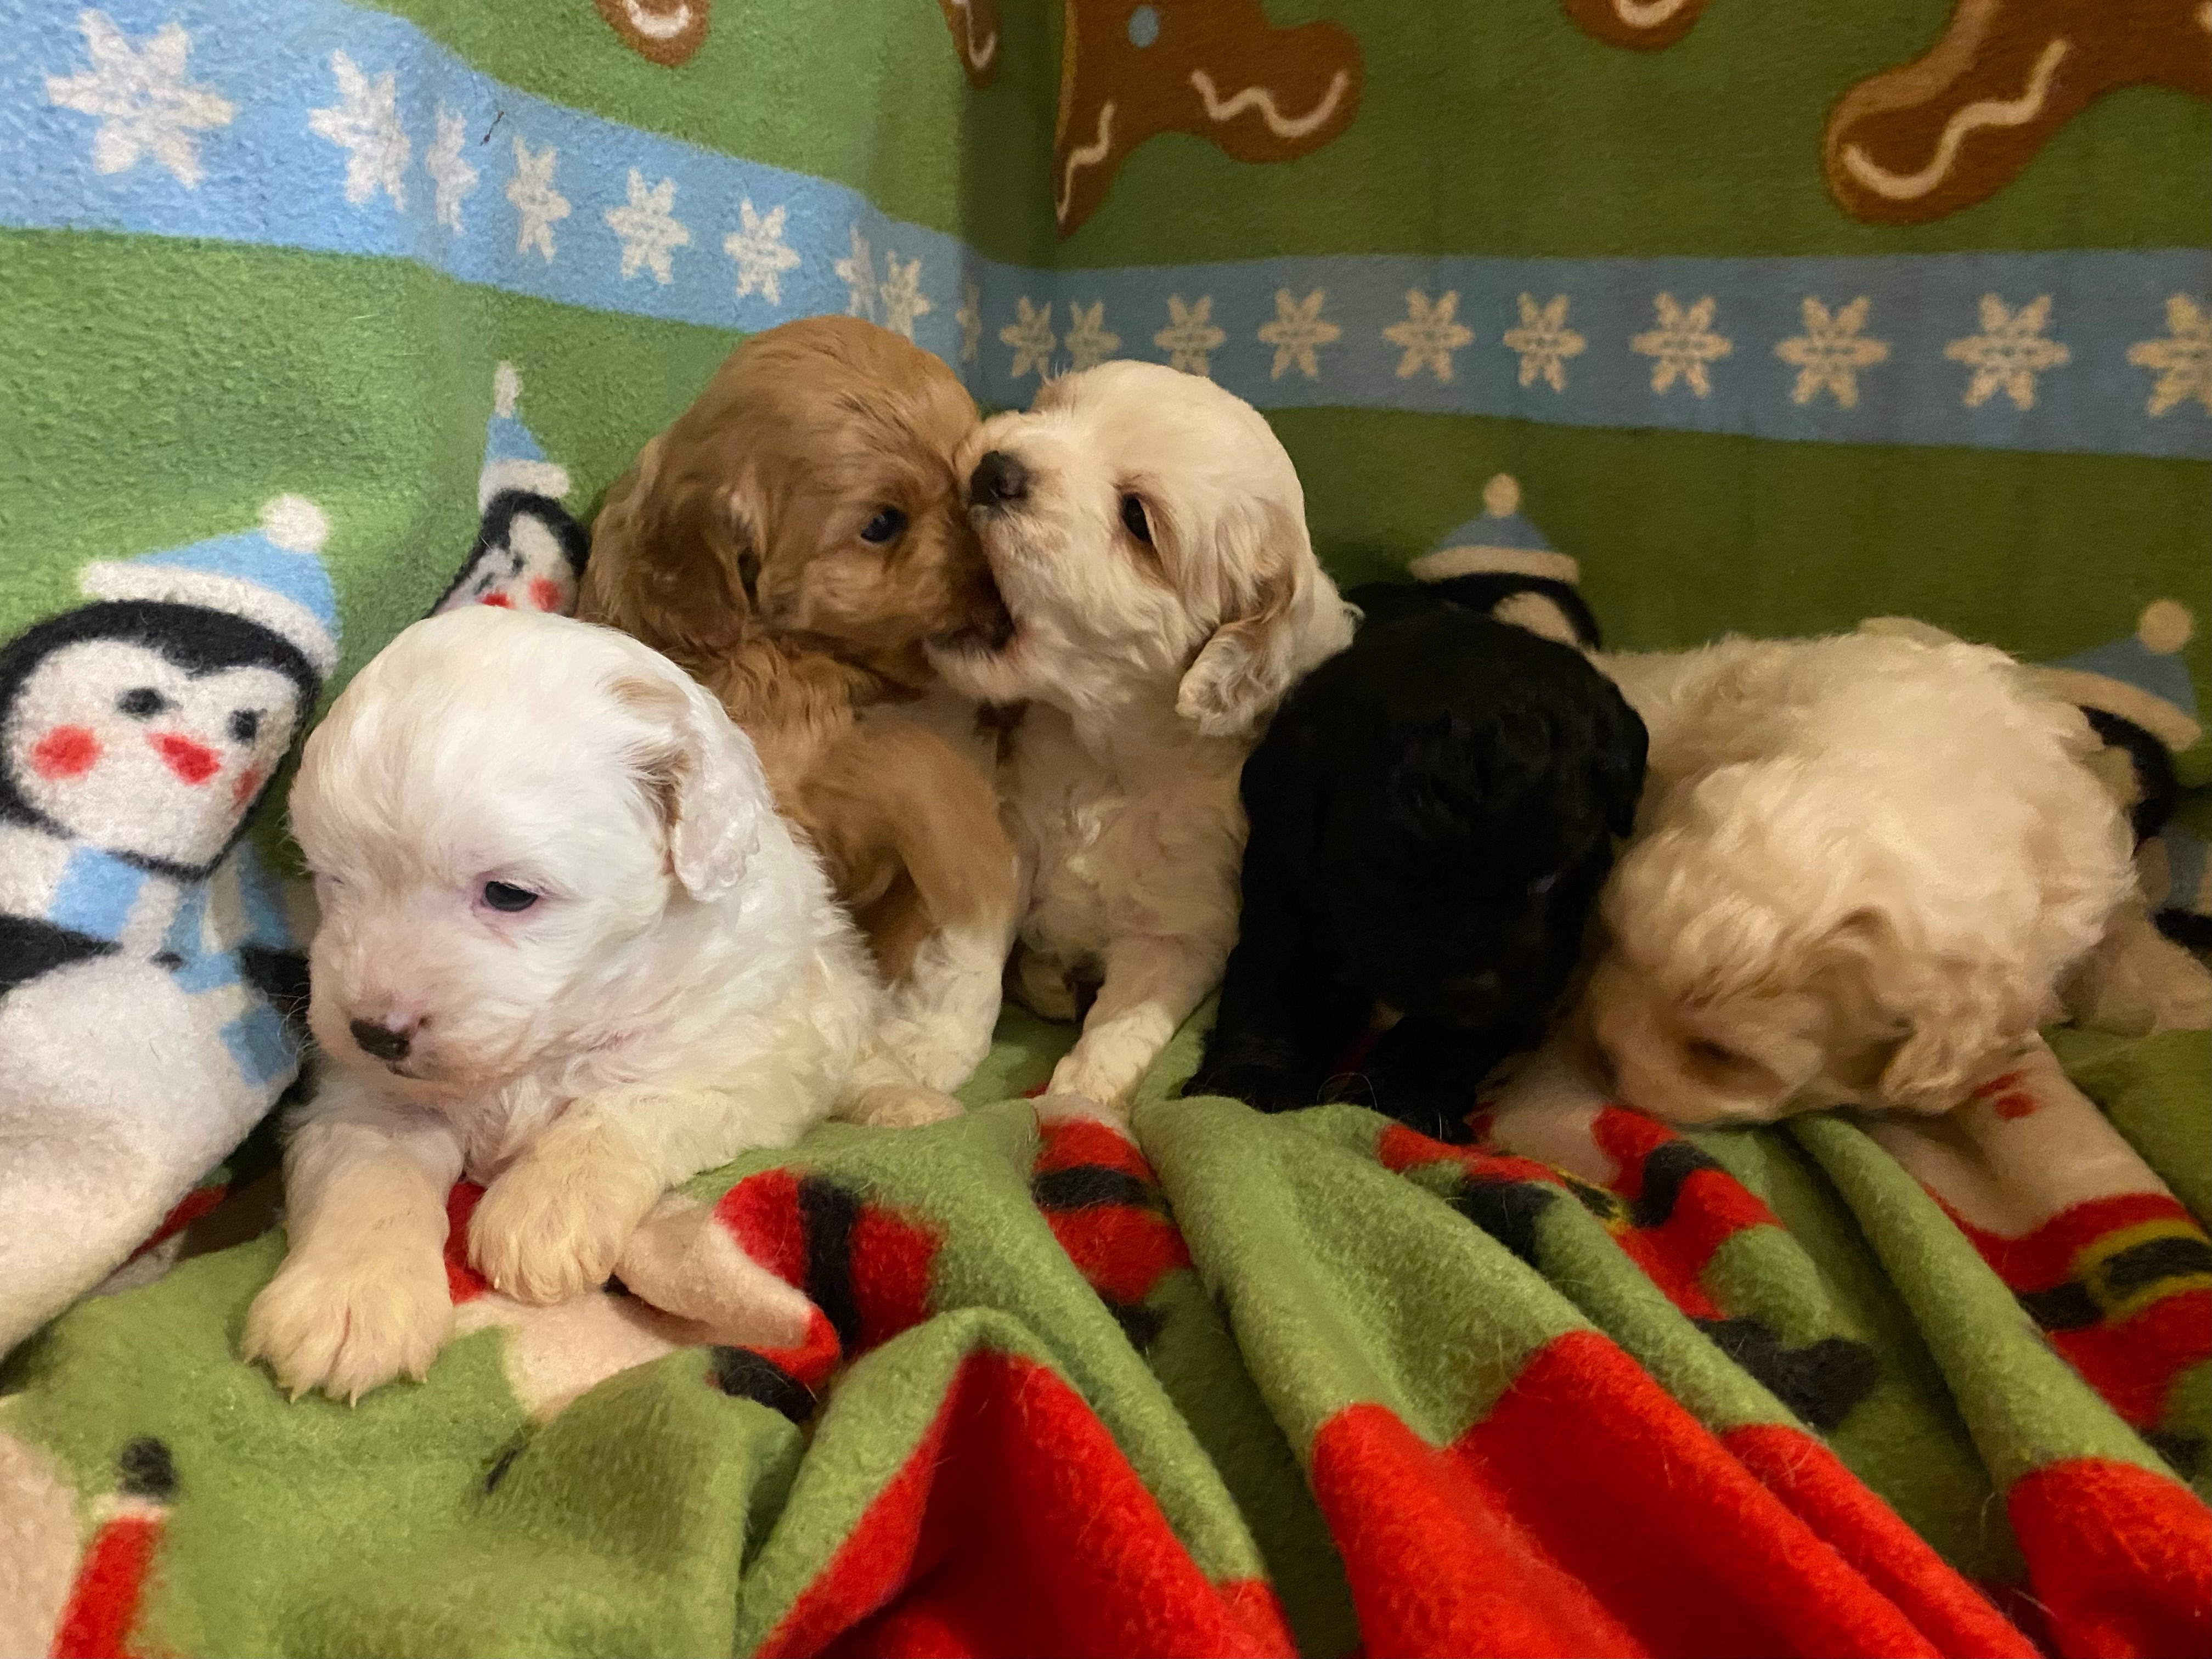 Cockapoo Puppies 8 weeks old.  Cockapoo Puppies 8 weeks old. $1200 ea. Males and Females. Shots and Wormed. Call 406-560-1251